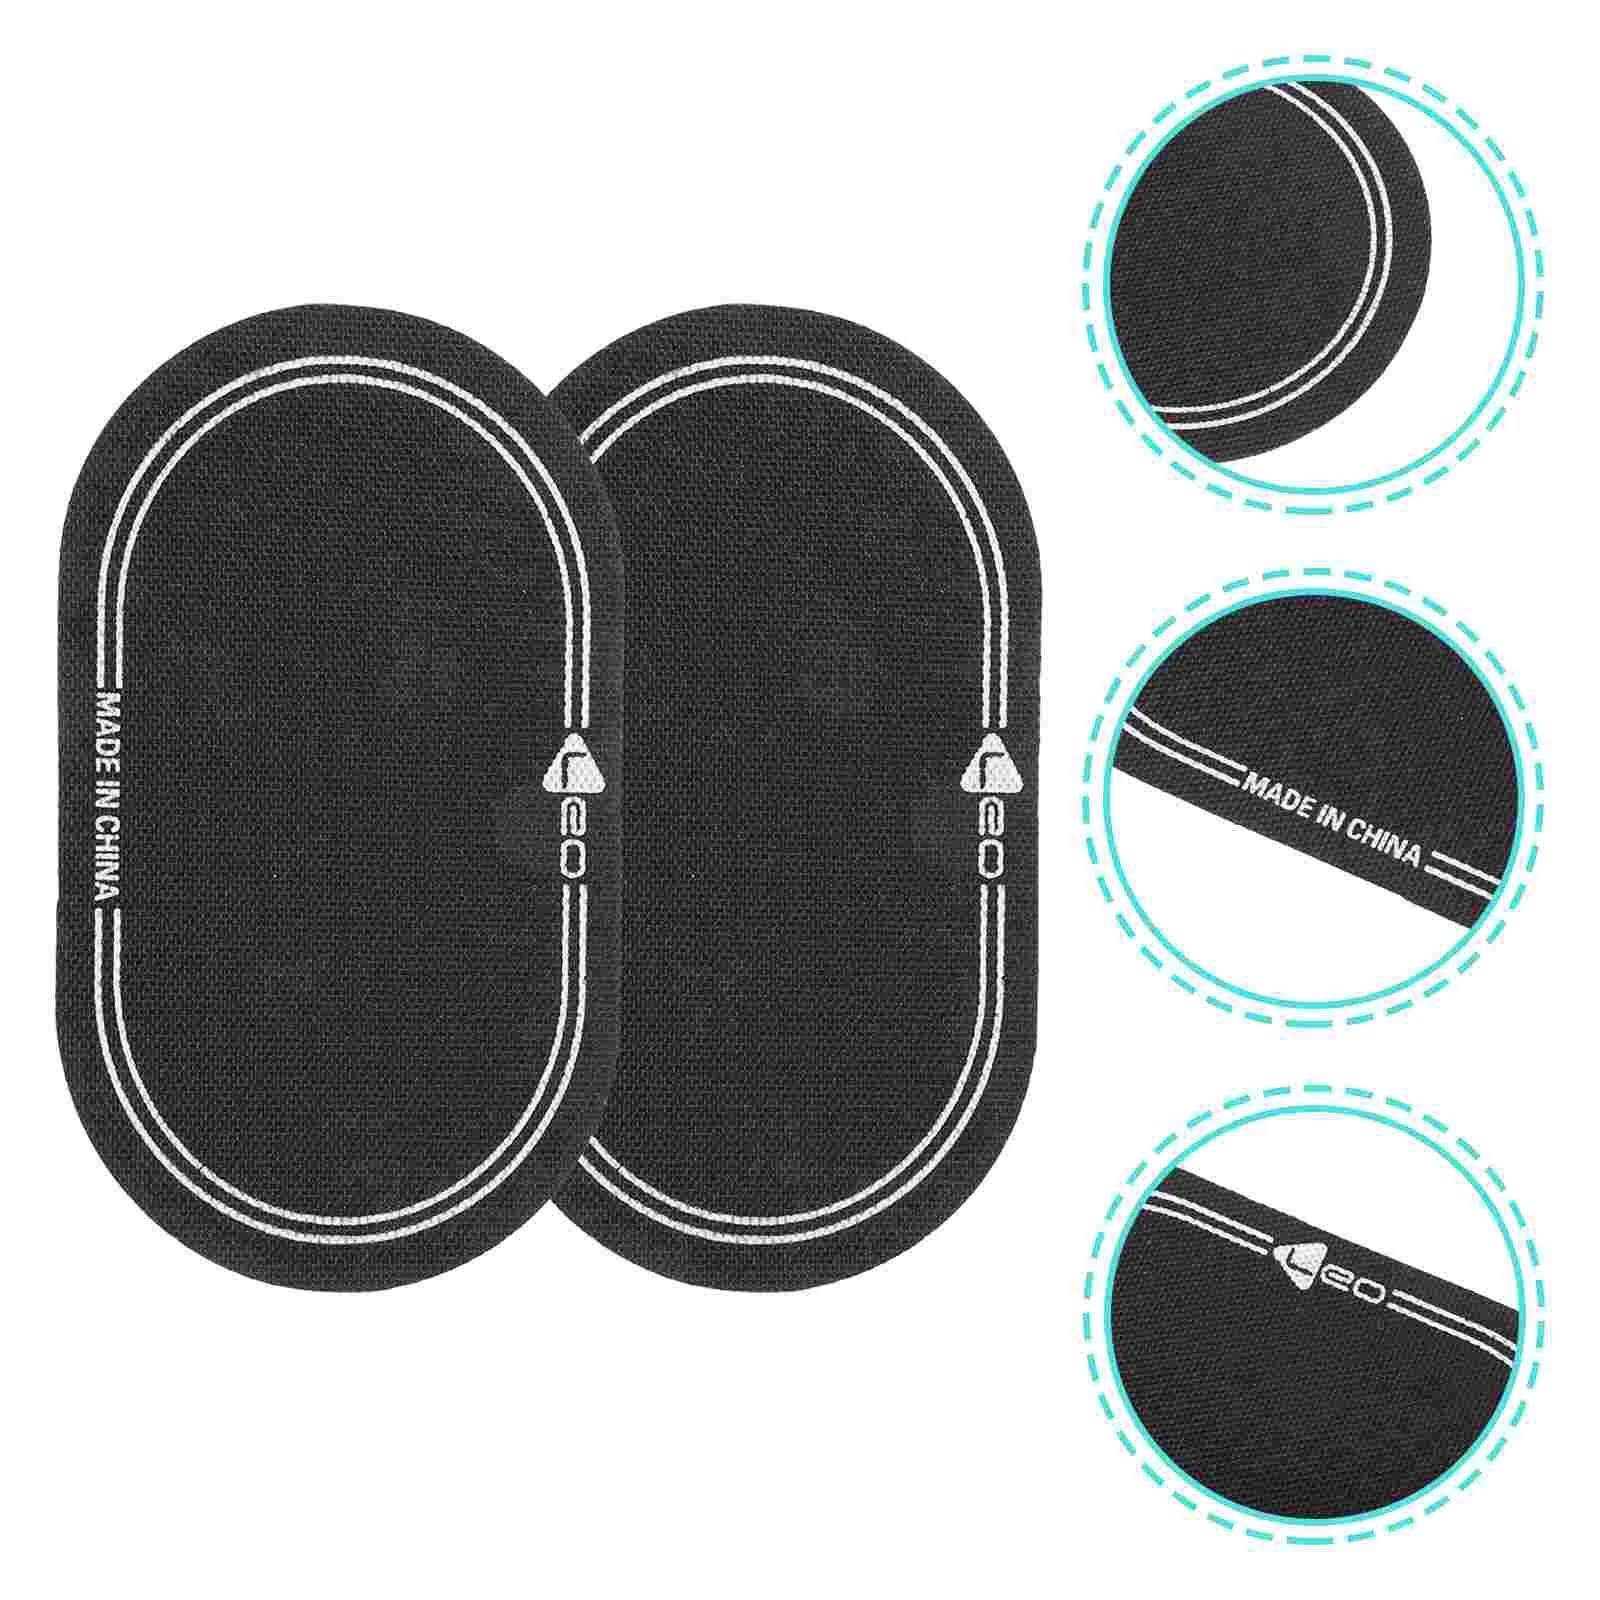 

Pedal Bass Drum Patches Bass Drum Head Pad Impact Patch Protective Drum Head Patches Drumhead Protector Drum Head